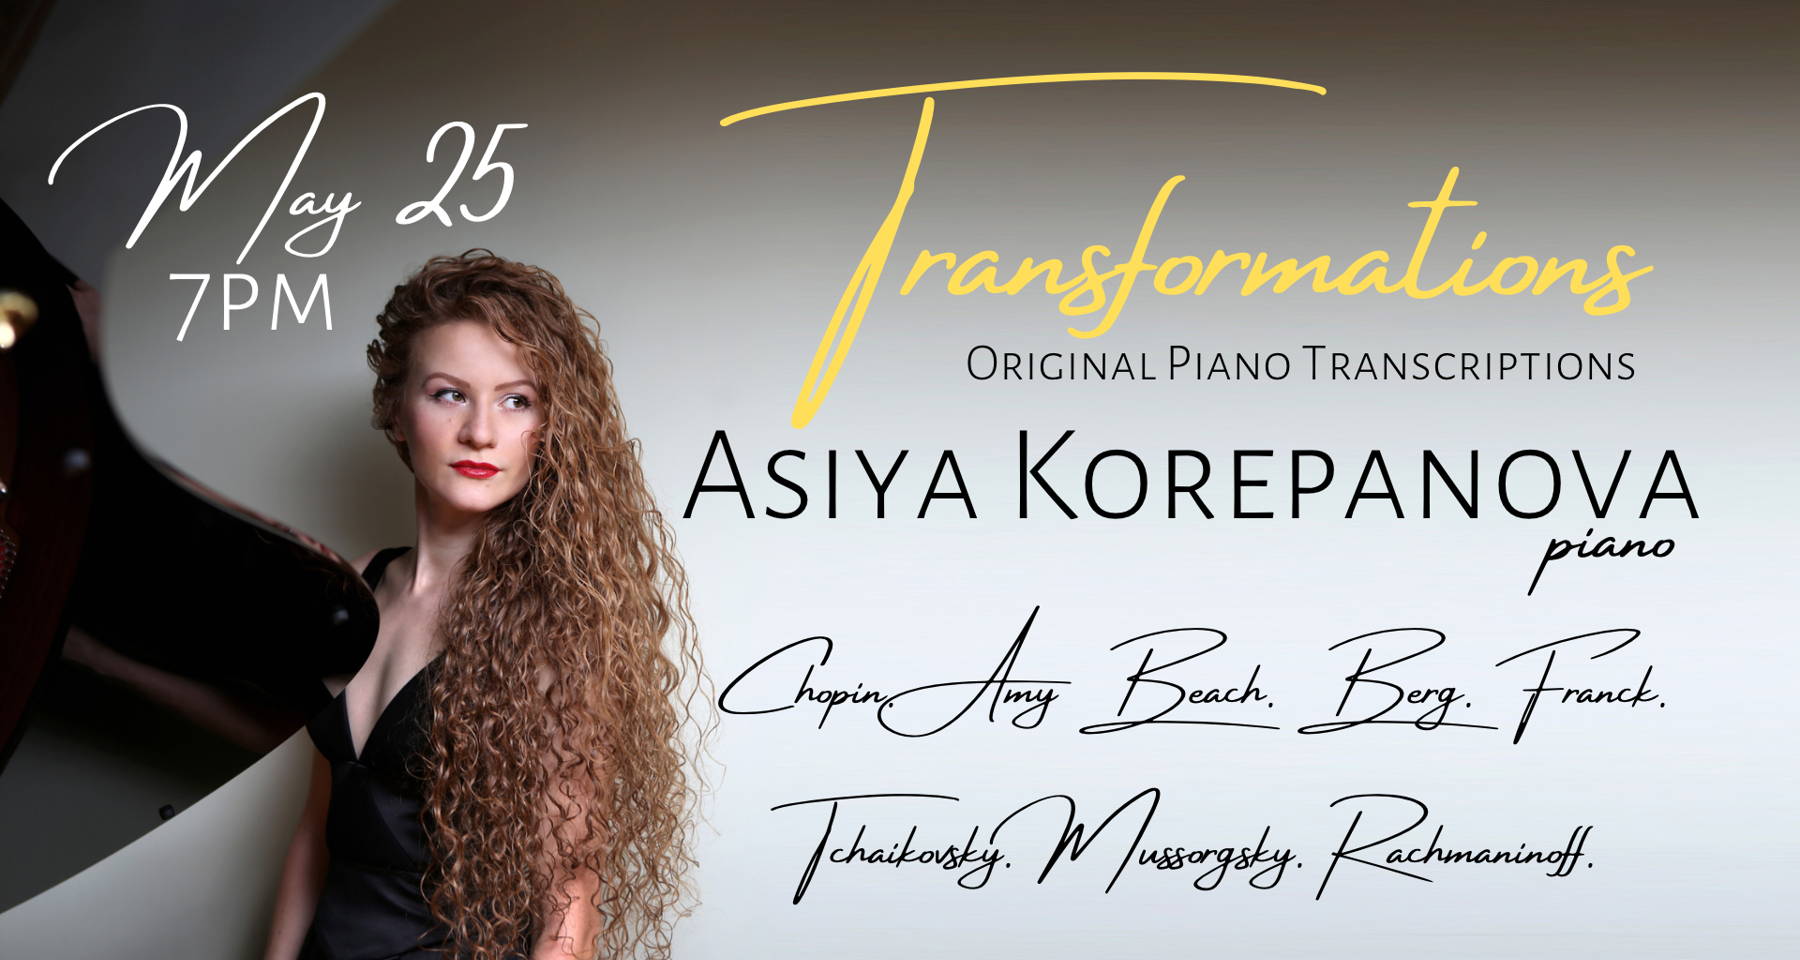 Transformations - piano transcriptions of works by Chopin, Amy Beach, Berg, Franck, Tchaikovsky, Mussorgsky, featuring complete Rachmaninoff Cello Sonata for piano solo.